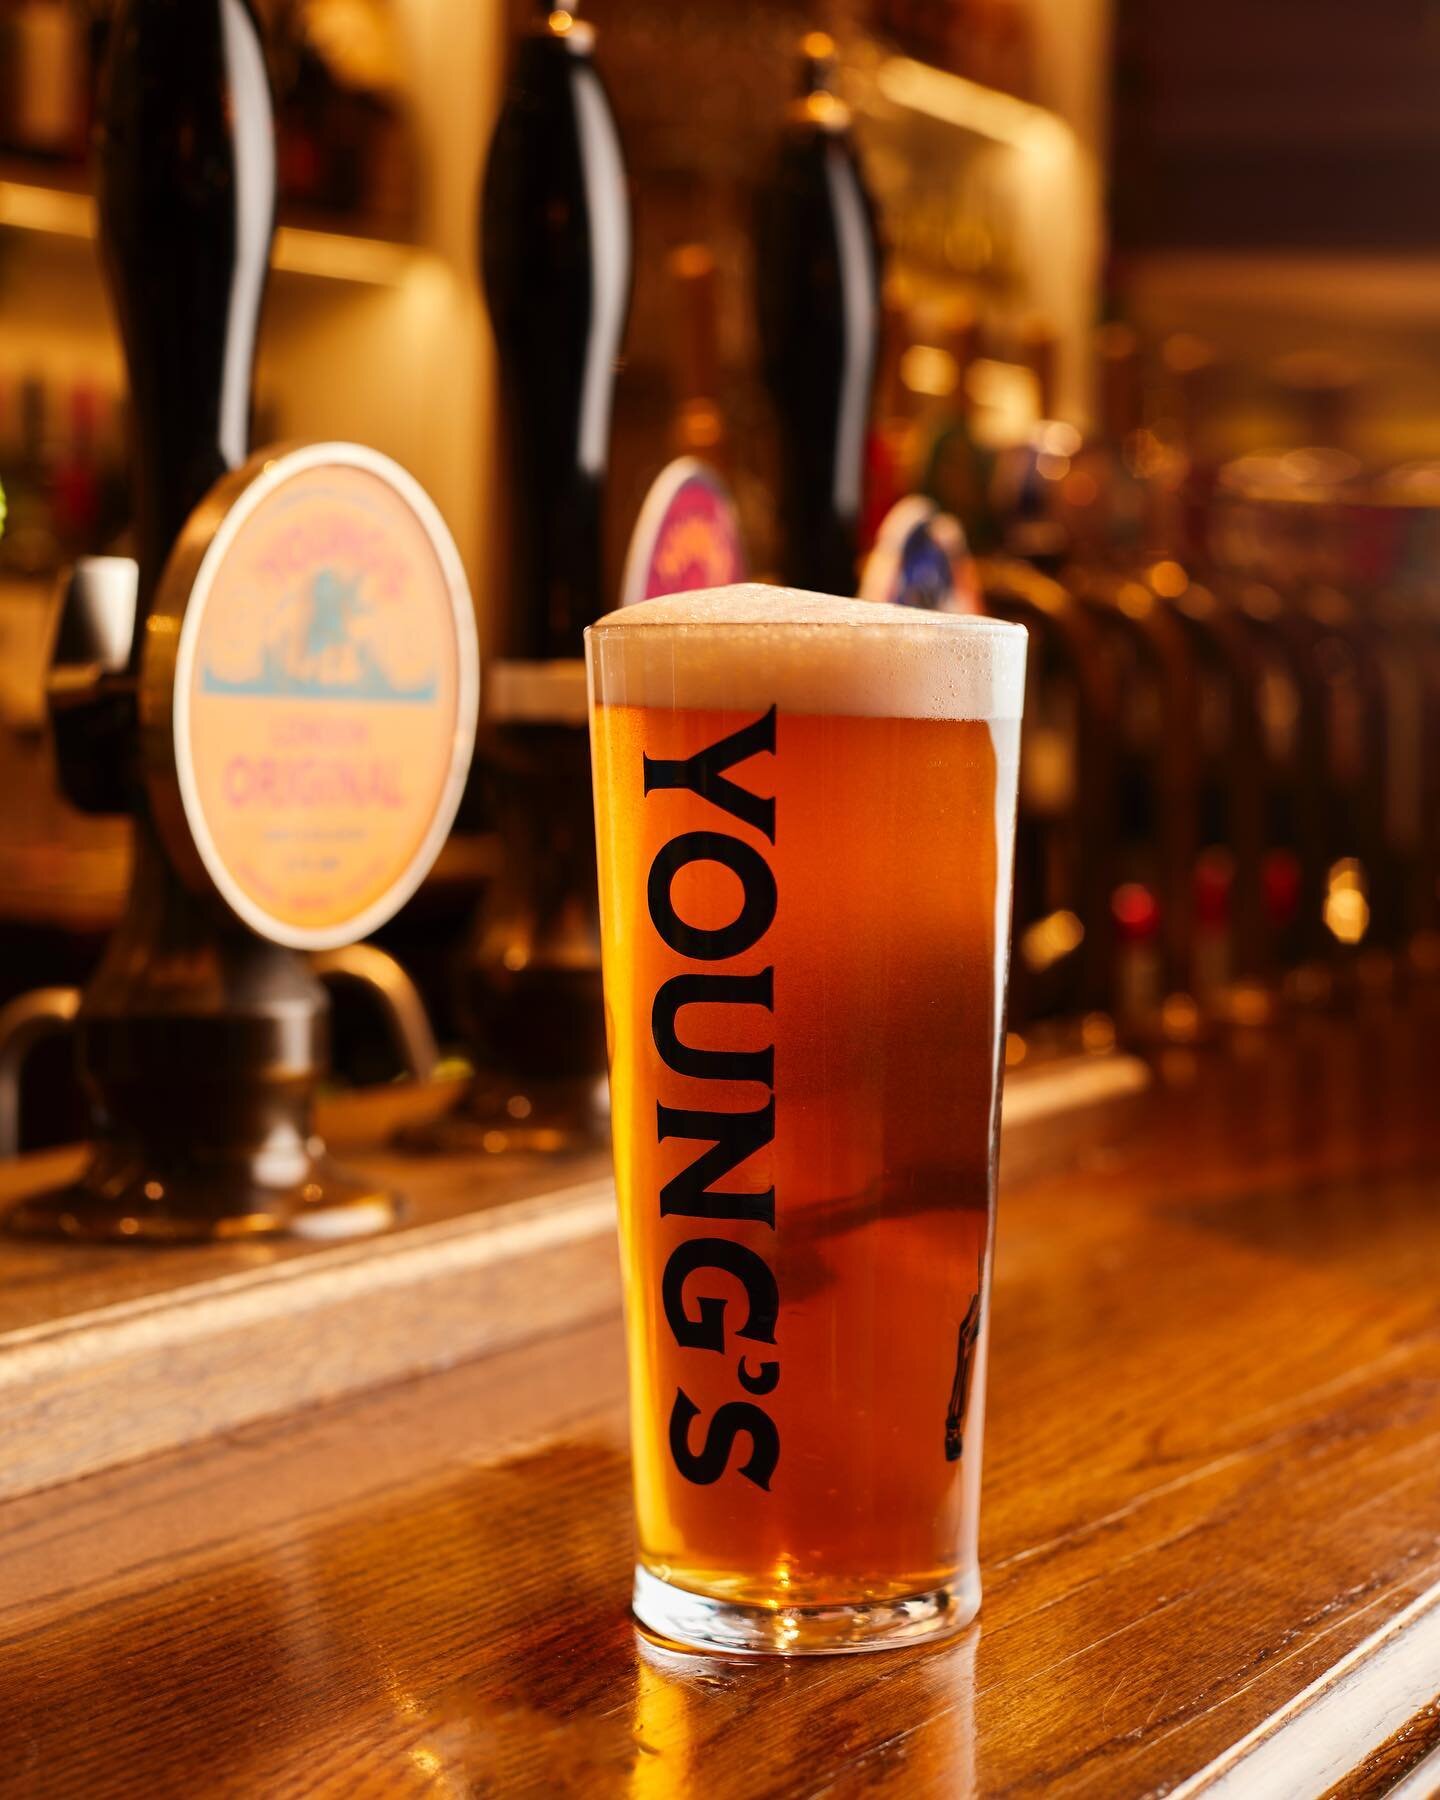 The Golden Glow of a London Classic @youngsbeer Original. 🍺
Shot with @feedforthetree 
.
.
.
.
.
.
.
#london #beer #realale #caskbeer #longlivethelocal #caskisking #photography #drinkphotography #pubs #refreshing #classic #design #handpull #freshbee